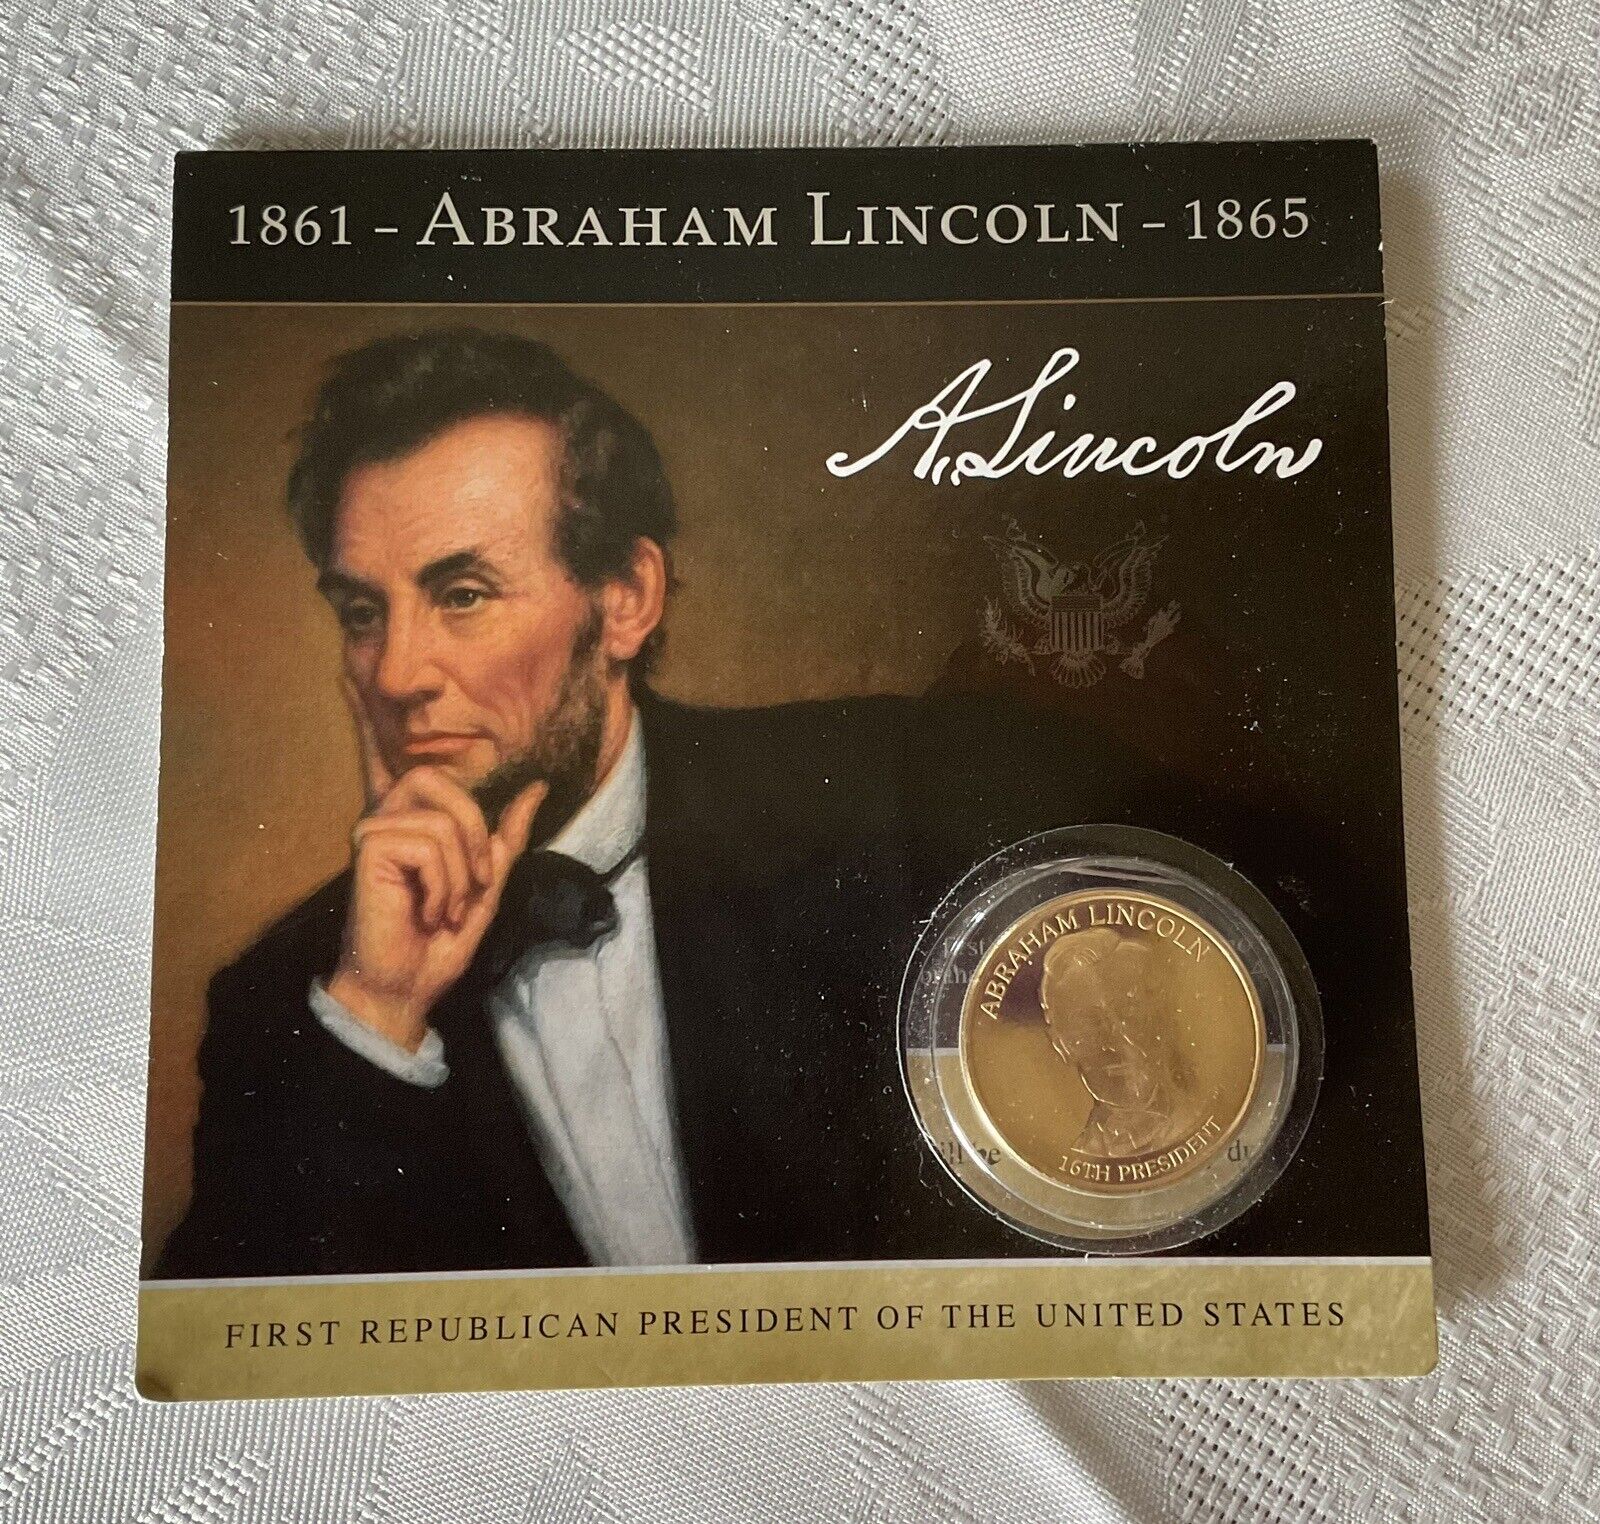 1861-1865 NEW COIN OF ABRAHAM LINCOLN 1ST REPUBLICAN PRESIDENT OF THE U.S.